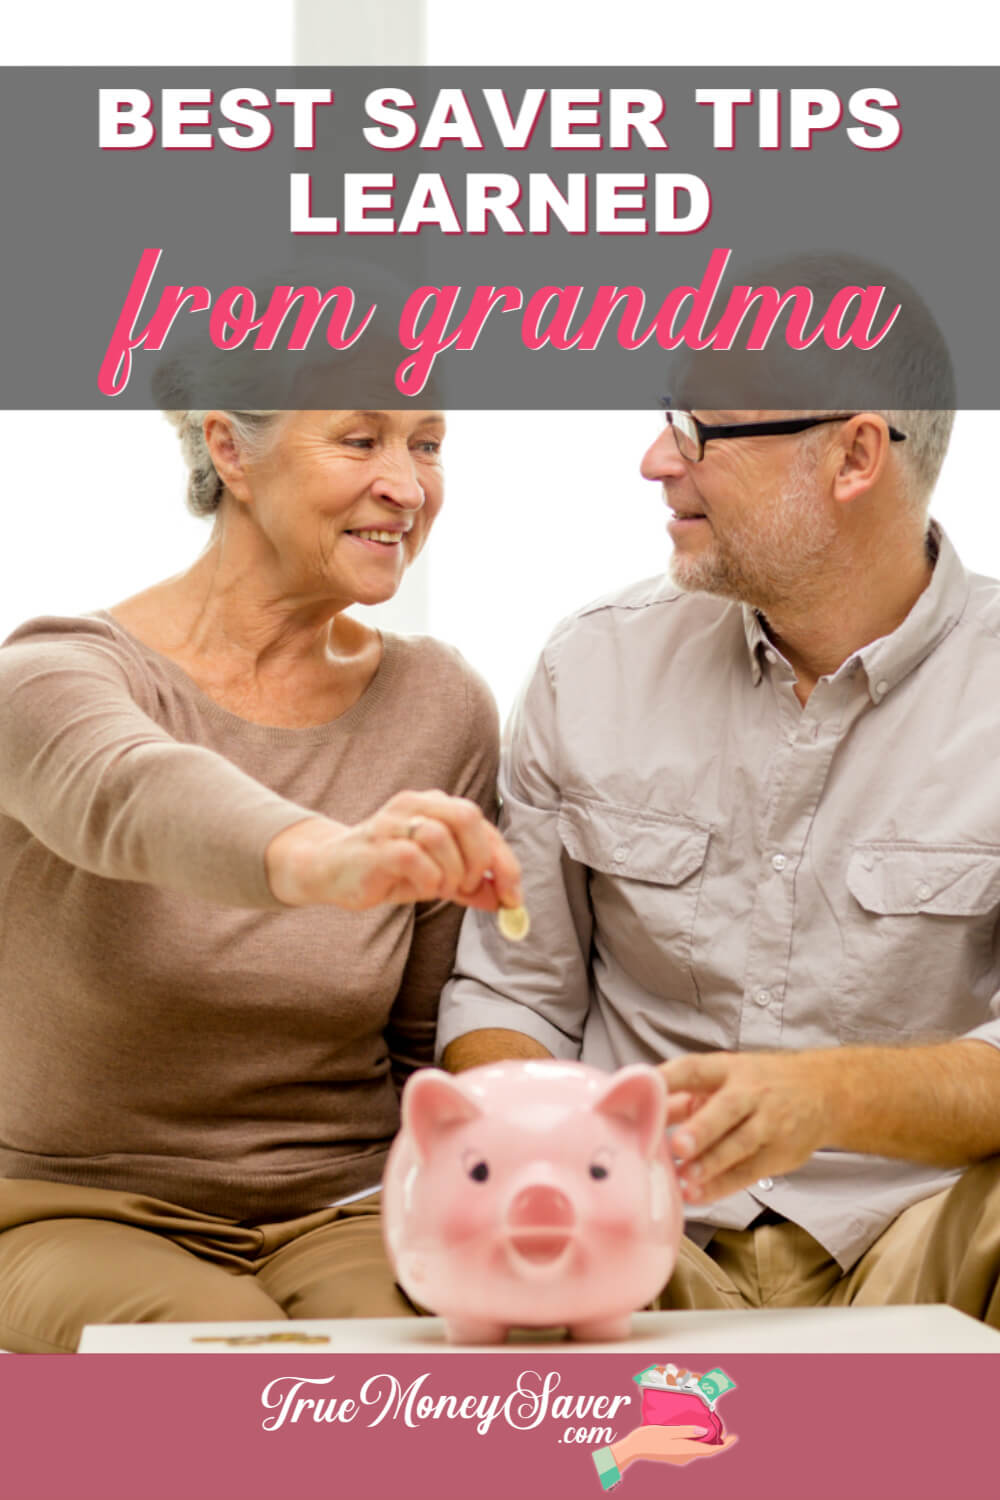 The Best Saver Tips From Your Grandmother That You Need Right Now